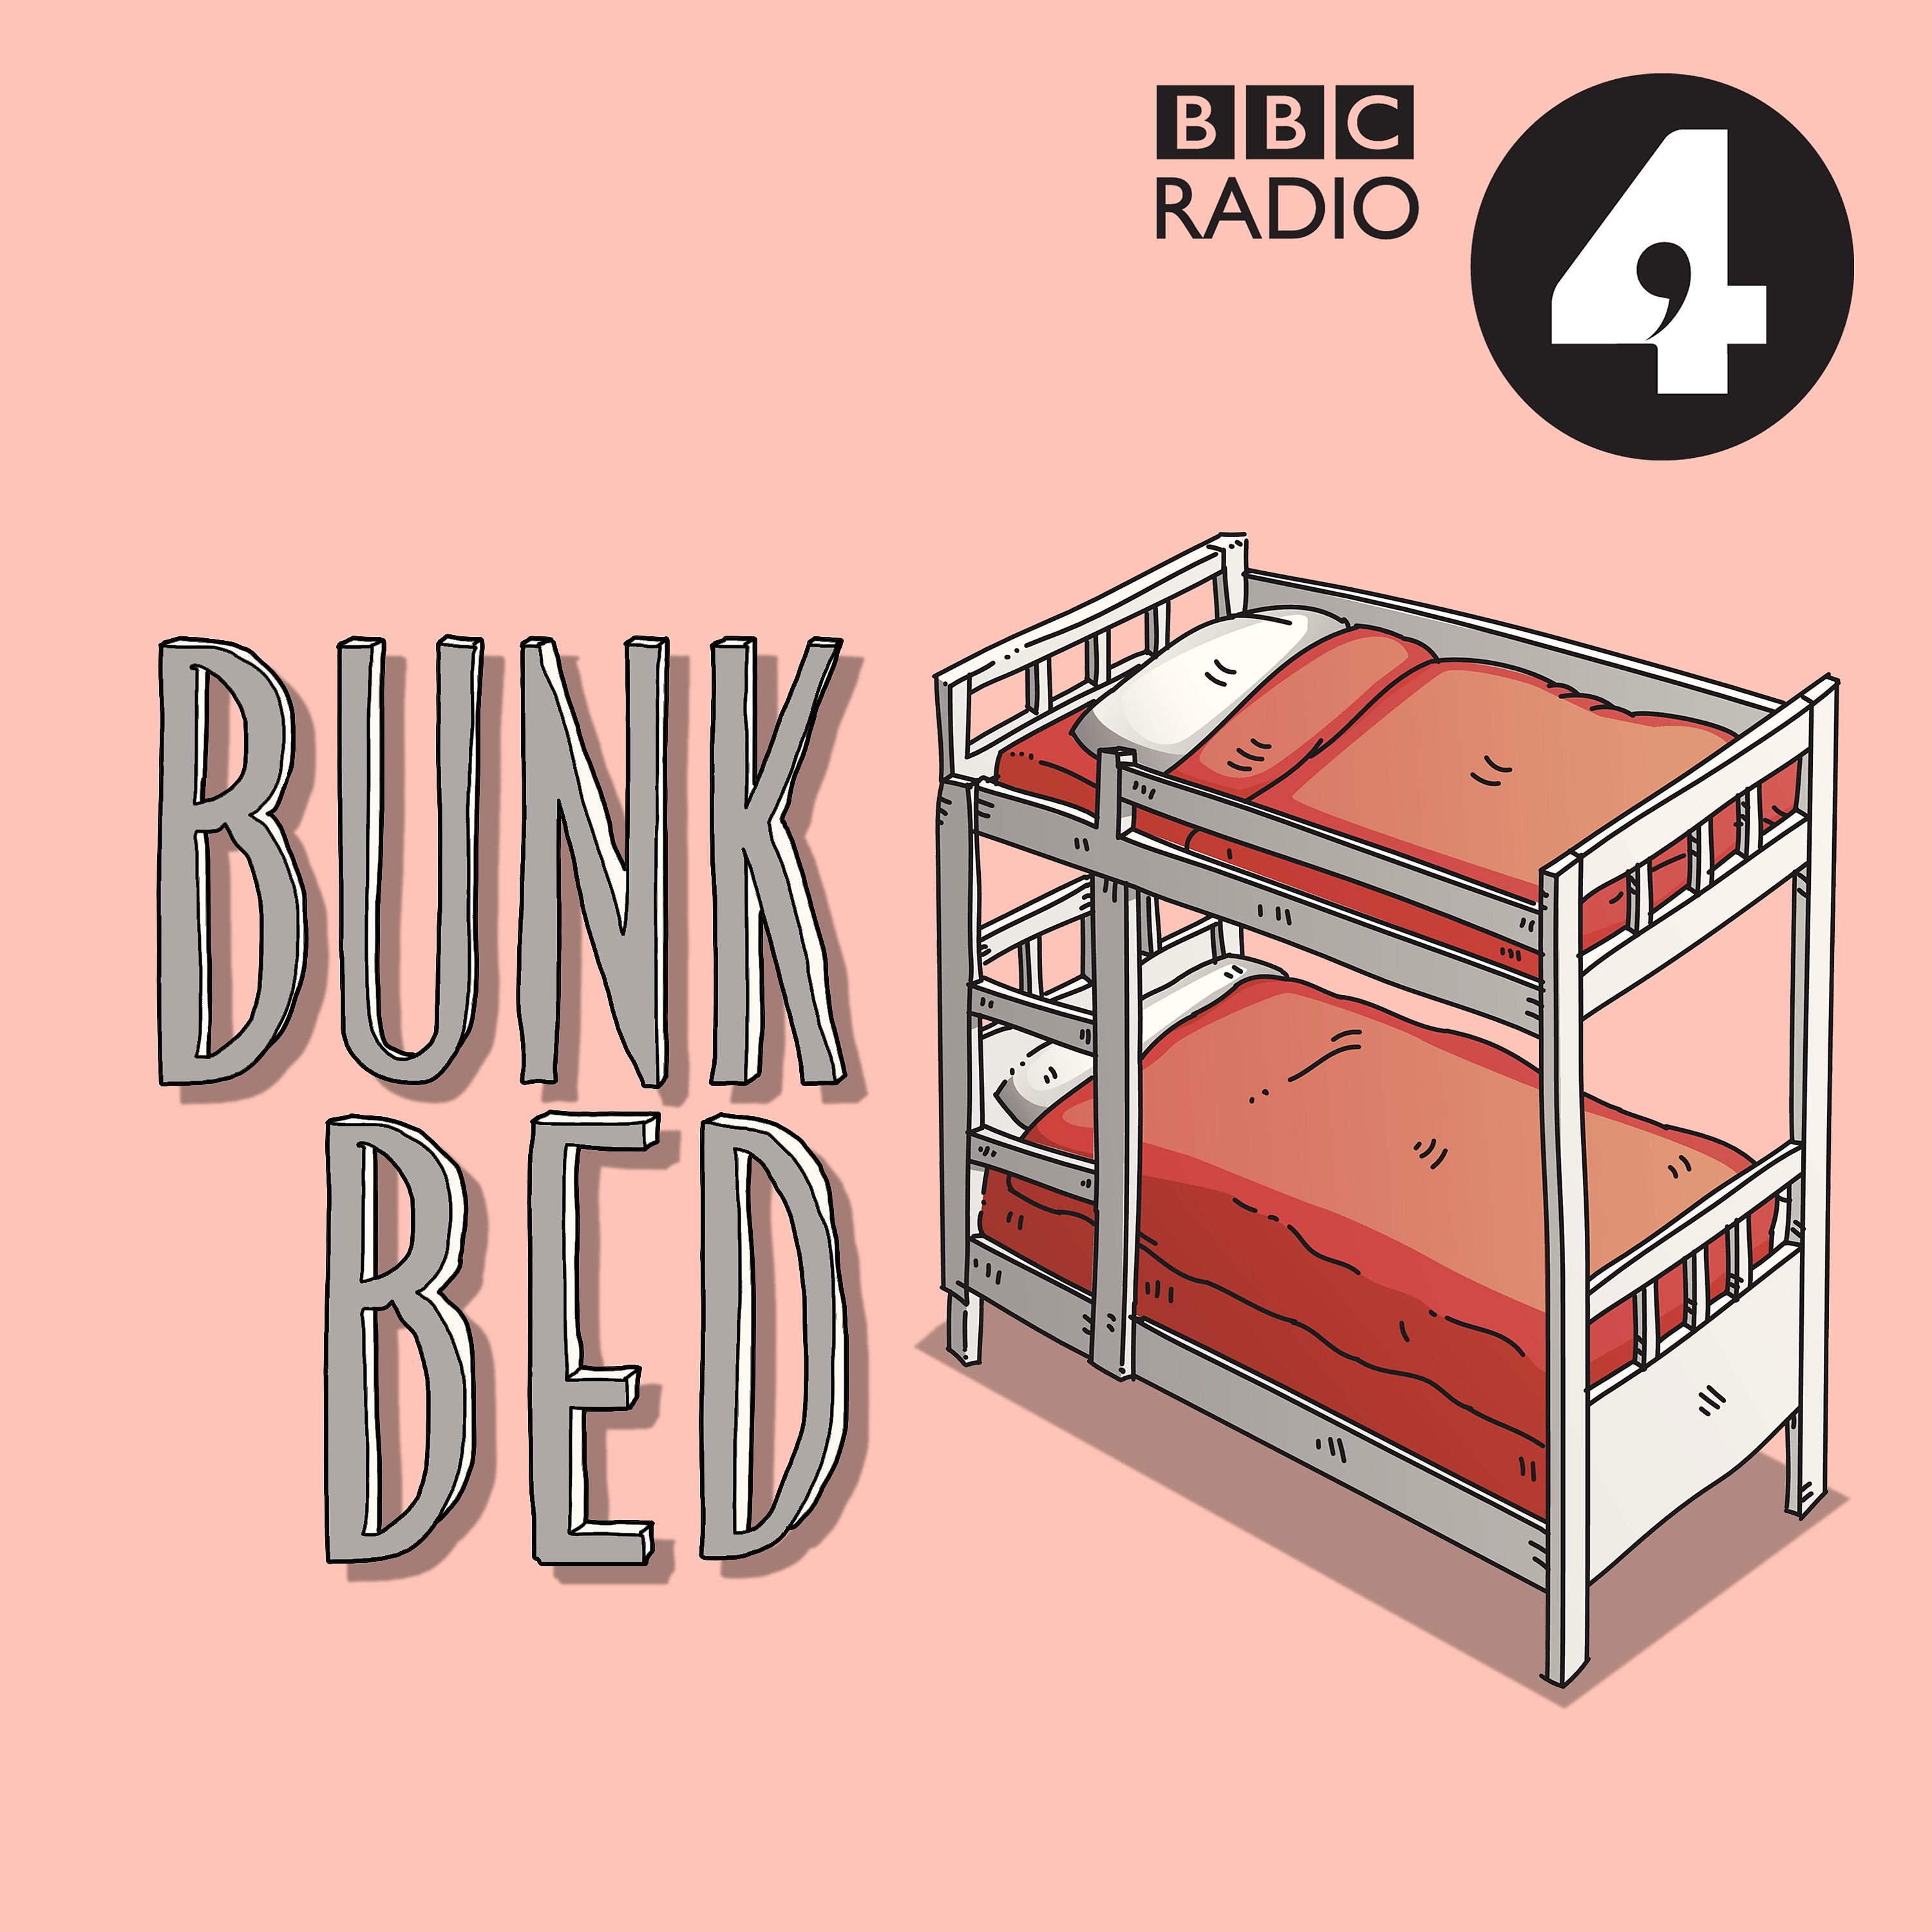 Bunk Bed podcast show image